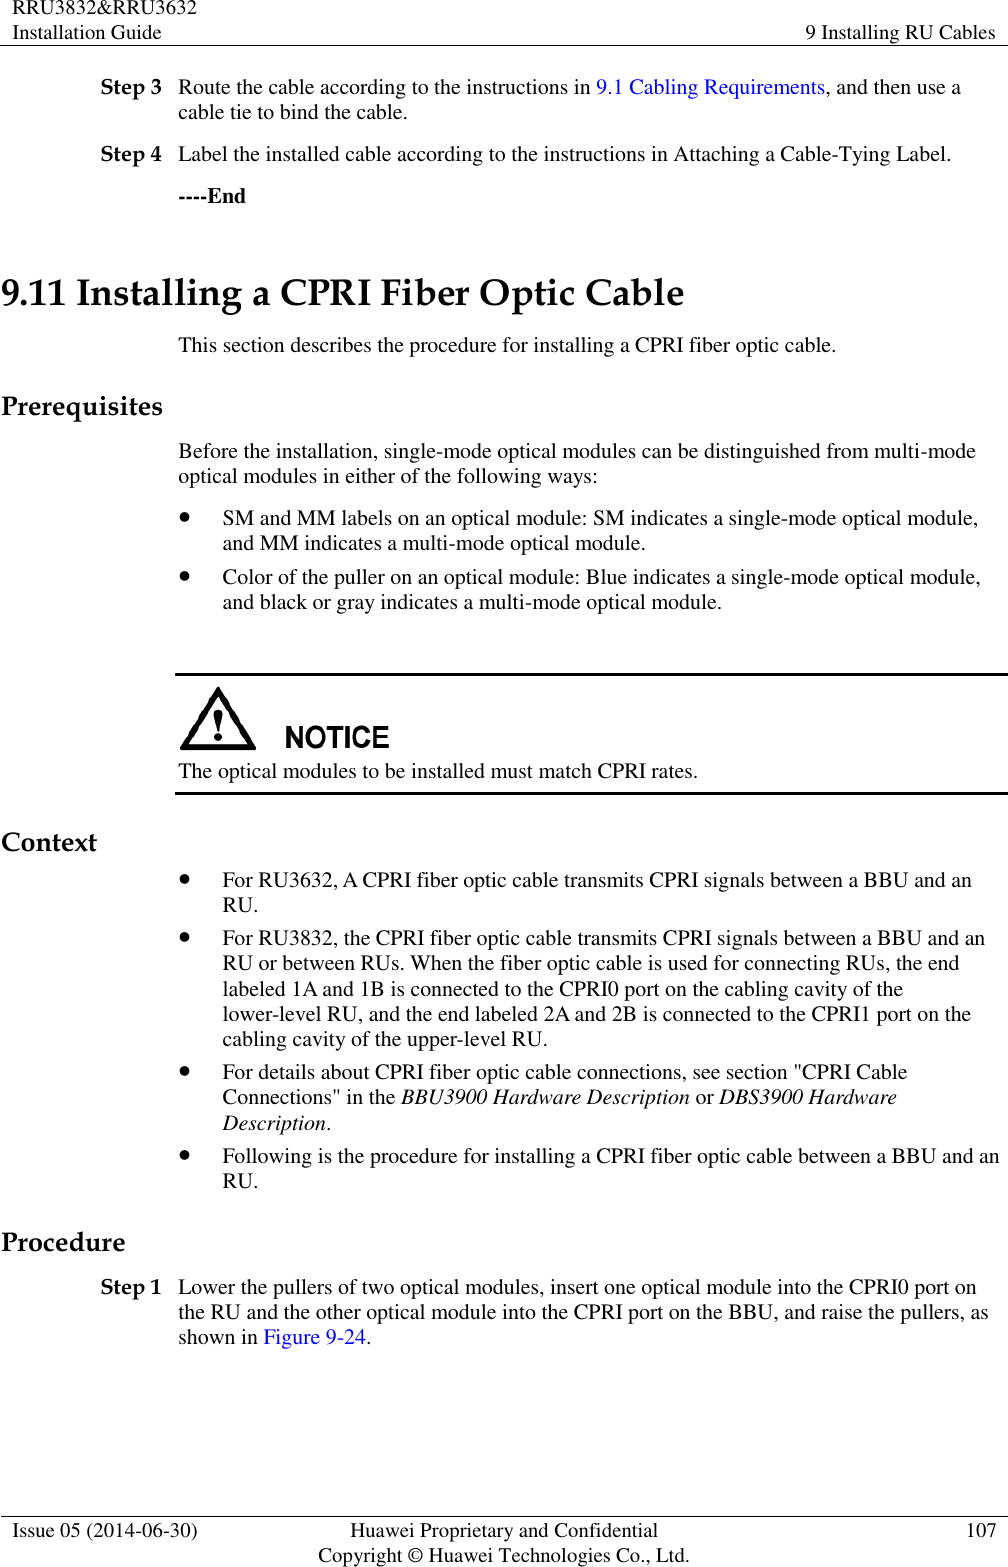 RRU3832&amp;RRU3632 Installation Guide 9 Installing RU Cables  Issue 05 (2014-06-30) Huawei Proprietary and Confidential                                     Copyright © Huawei Technologies Co., Ltd. 107  Step 3 Route the cable according to the instructions in 9.1 Cabling Requirements, and then use a cable tie to bind the cable. Step 4 Label the installed cable according to the instructions in Attaching a Cable-Tying Label. ----End 9.11 Installing a CPRI Fiber Optic Cable This section describes the procedure for installing a CPRI fiber optic cable. Prerequisites Before the installation, single-mode optical modules can be distinguished from multi-mode optical modules in either of the following ways:  SM and MM labels on an optical module: SM indicates a single-mode optical module, and MM indicates a multi-mode optical module.  Color of the puller on an optical module: Blue indicates a single-mode optical module, and black or gray indicates a multi-mode optical module.   The optical modules to be installed must match CPRI rates. Context  For RU3632, A CPRI fiber optic cable transmits CPRI signals between a BBU and an RU.  For RU3832, the CPRI fiber optic cable transmits CPRI signals between a BBU and an RU or between RUs. When the fiber optic cable is used for connecting RUs, the end labeled 1A and 1B is connected to the CPRI0 port on the cabling cavity of the lower-level RU, and the end labeled 2A and 2B is connected to the CPRI1 port on the cabling cavity of the upper-level RU.  For details about CPRI fiber optic cable connections, see section &quot;CPRI Cable Connections&quot; in the BBU3900 Hardware Description or DBS3900 Hardware Description.  Following is the procedure for installing a CPRI fiber optic cable between a BBU and an RU. Procedure Step 1 Lower the pullers of two optical modules, insert one optical module into the CPRI0 port on the RU and the other optical module into the CPRI port on the BBU, and raise the pullers, as shown in Figure 9-24. 